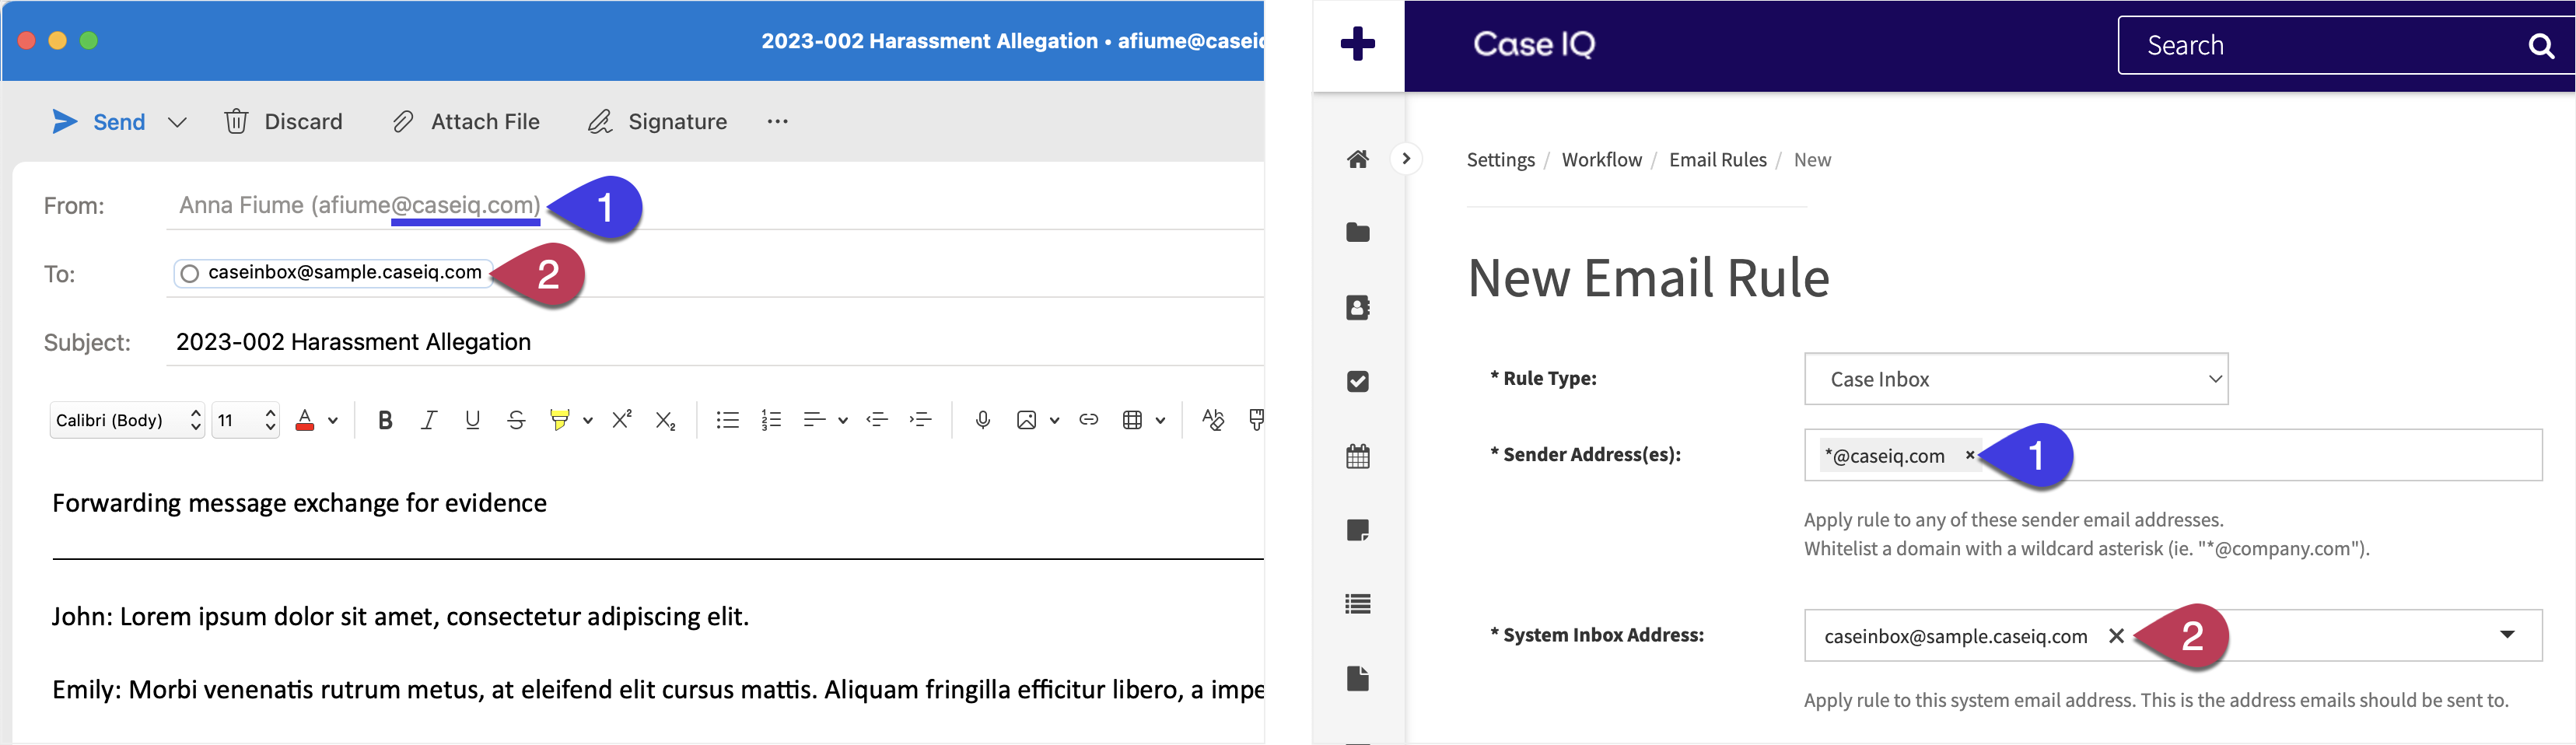 Side by side comparison of an email sent to the System Inbox email address and the example New Email Rule form for the Case Inbox rule created in the previous section. 